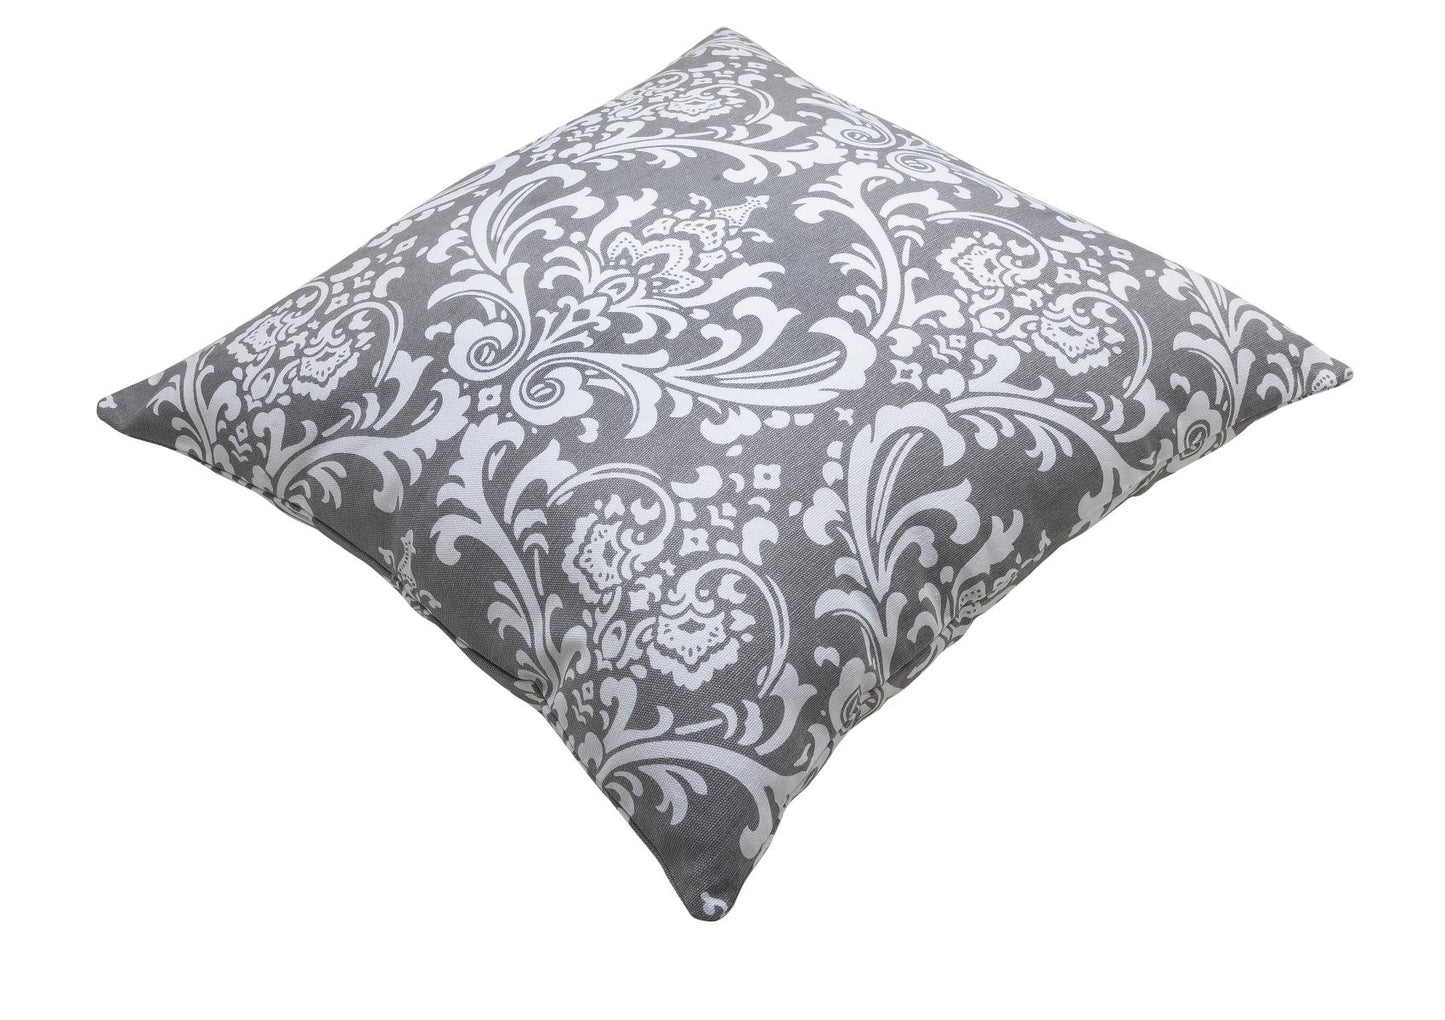 Damask Accent Decorative Throw Pillow Covers (Pack of 2) - TreeWool